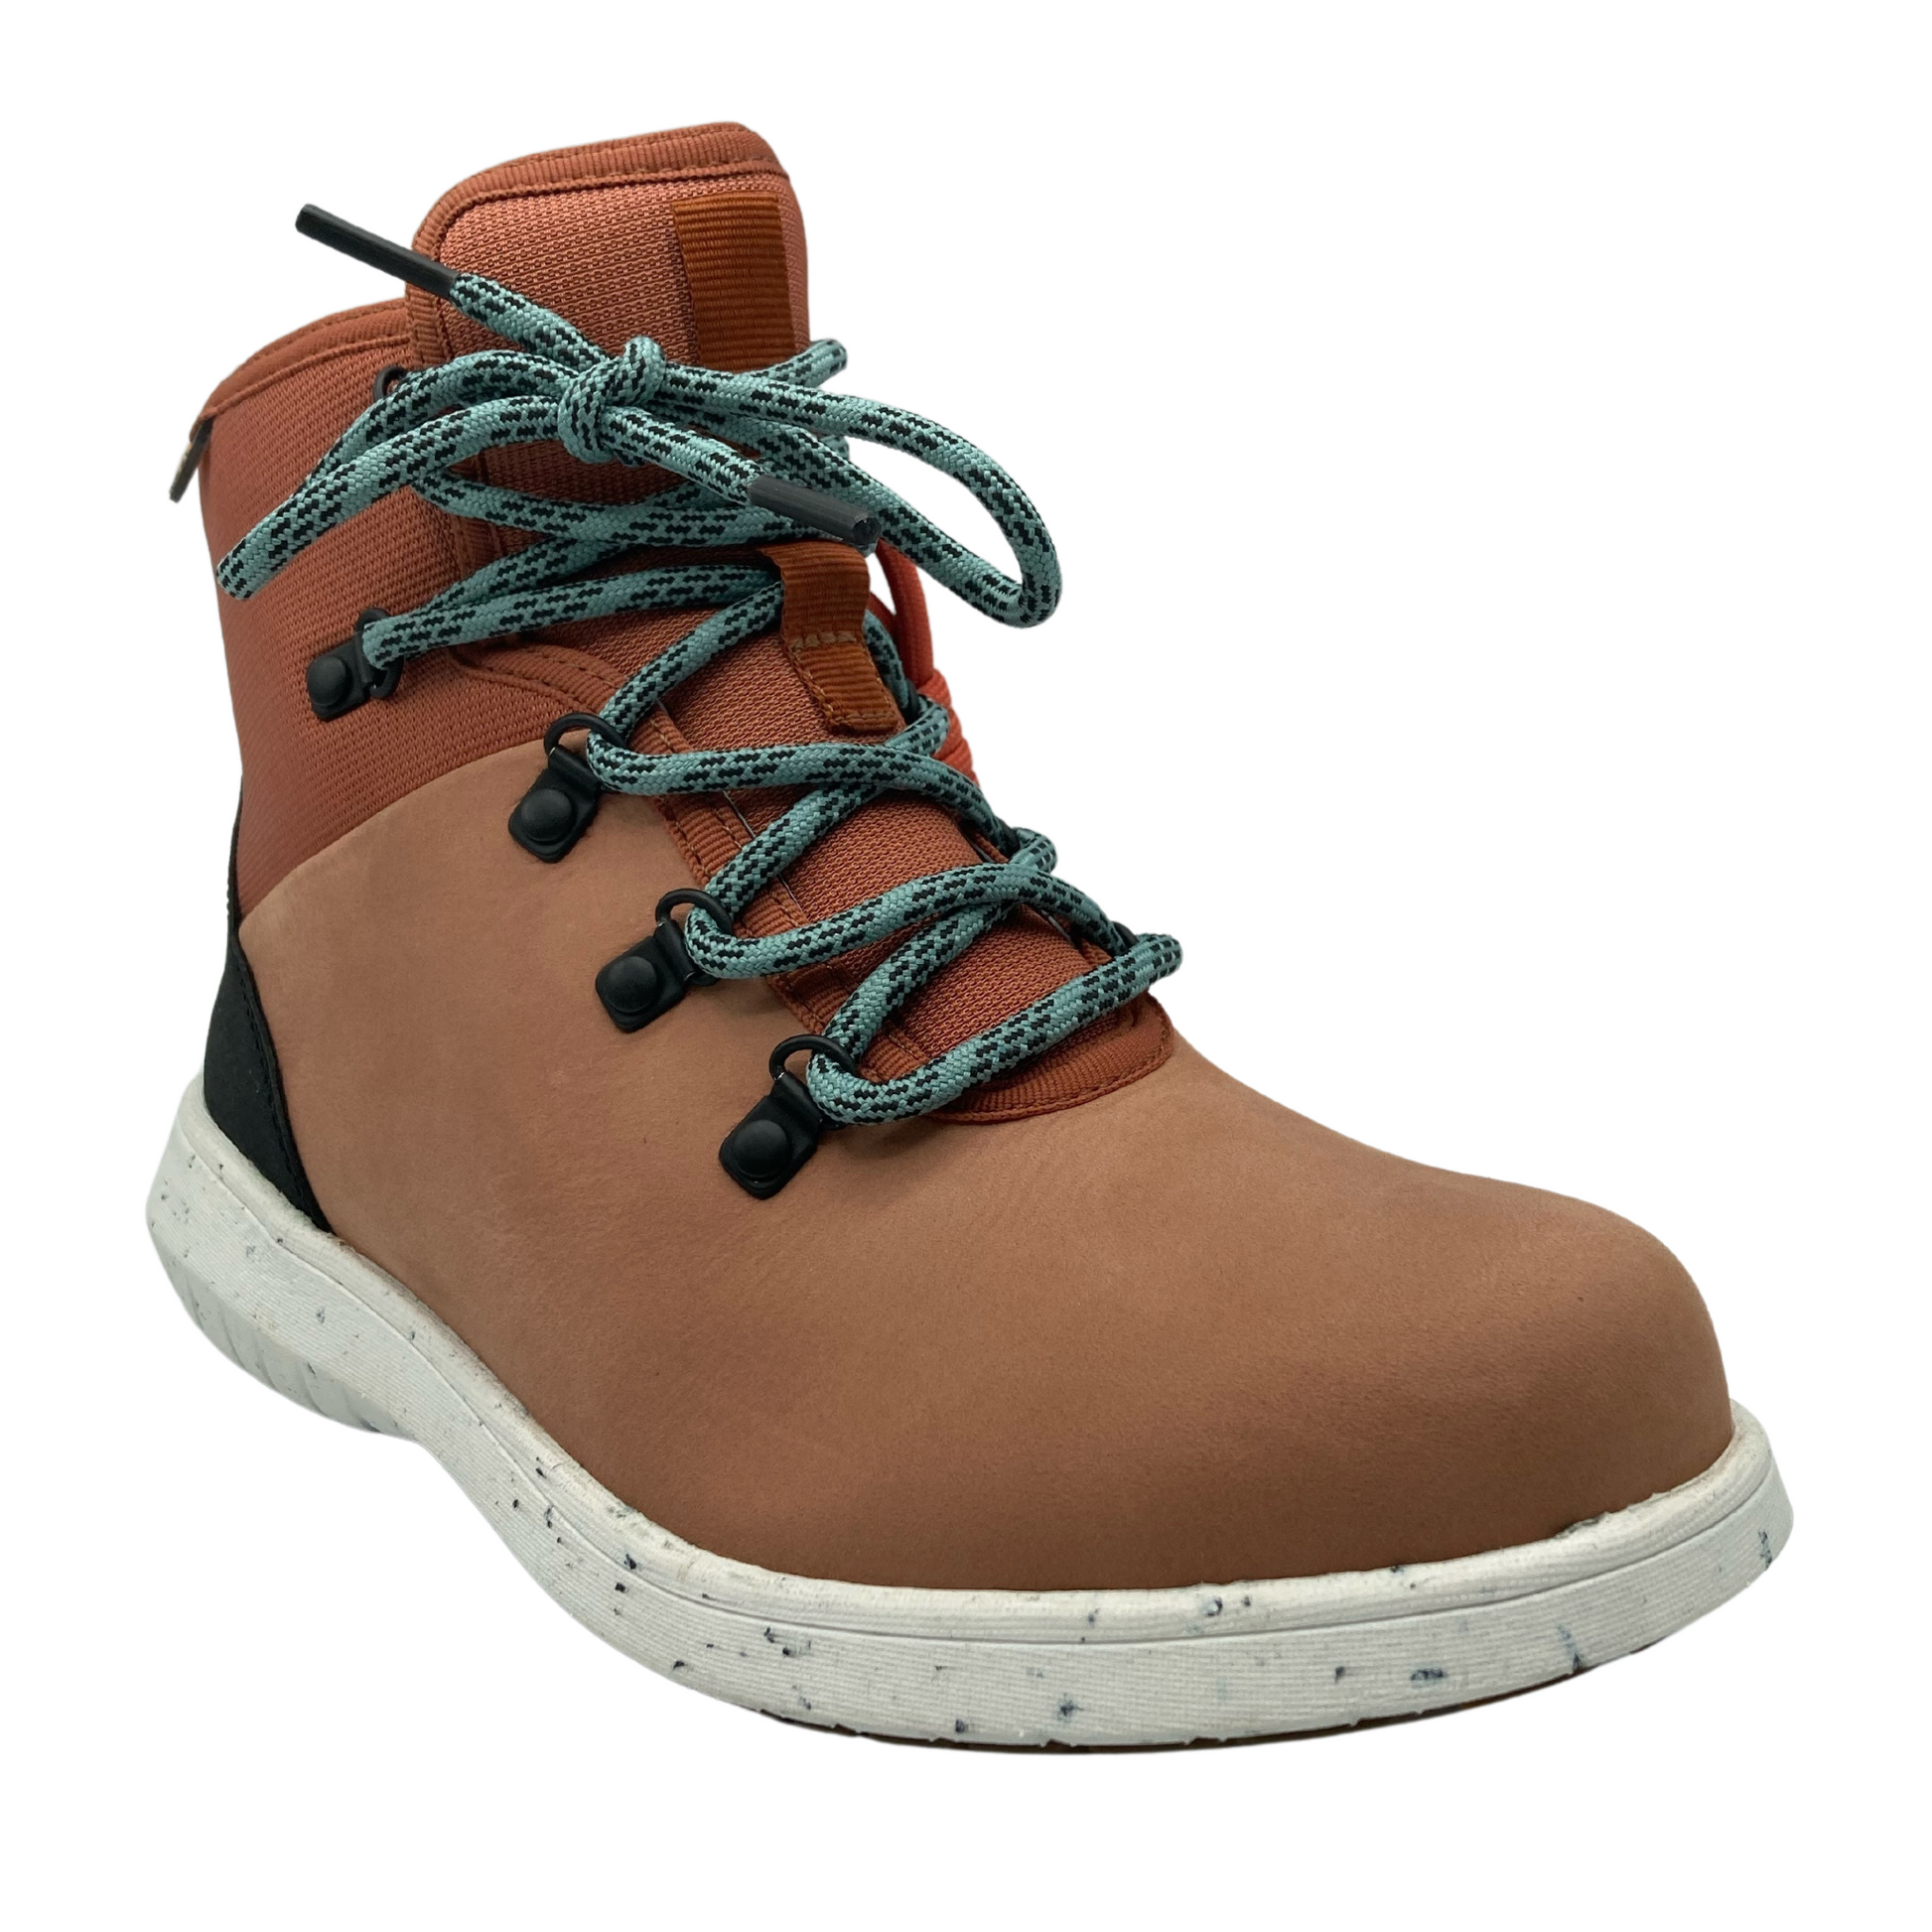 45 degree angled view of leather hiking boot with white outsole and teal laces